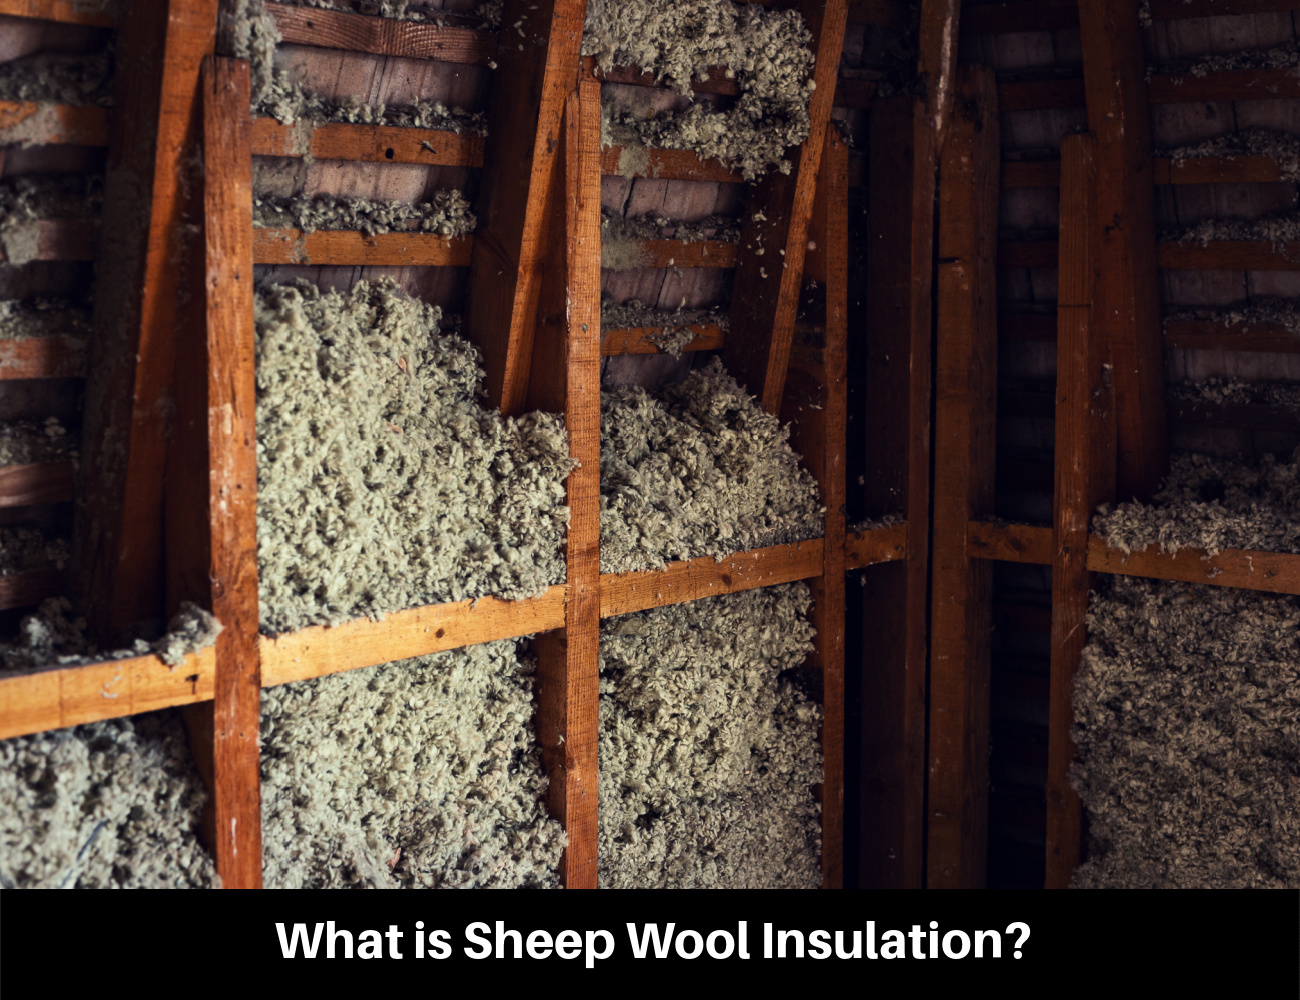 What is Sheep Wool Insulation?